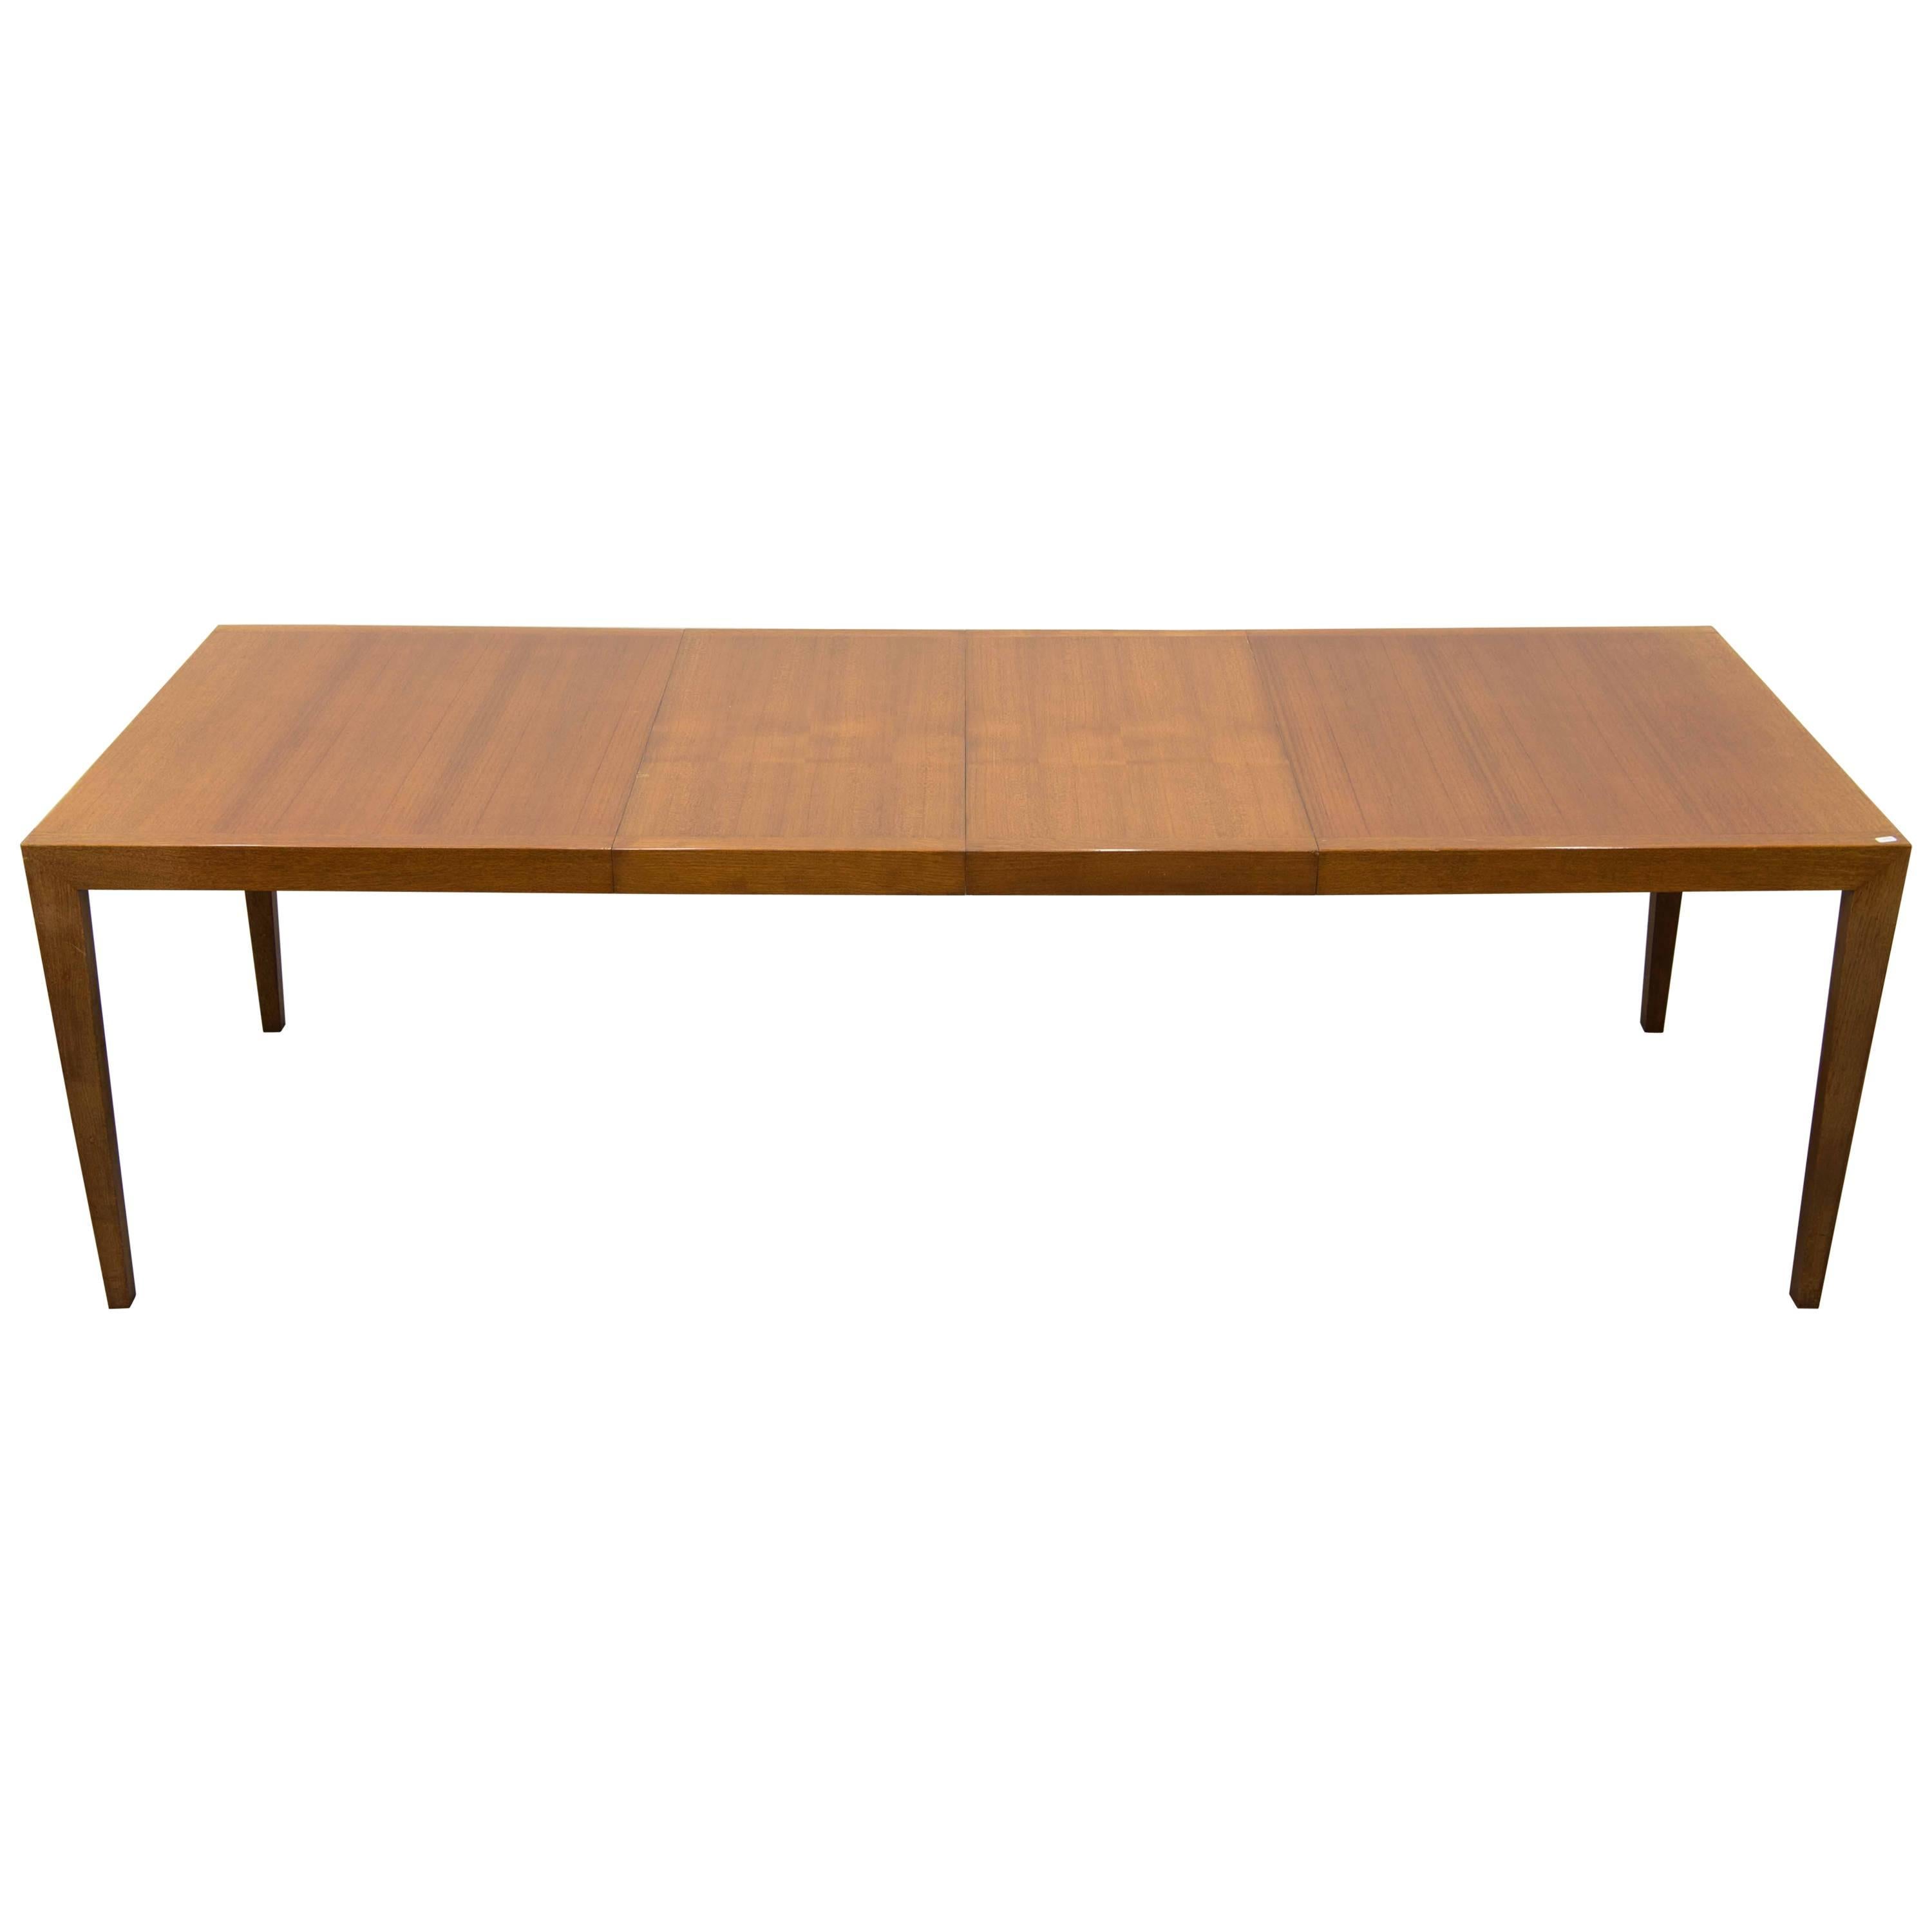 Florence Knoll for Knoll International, Dining Room Table in Walnut